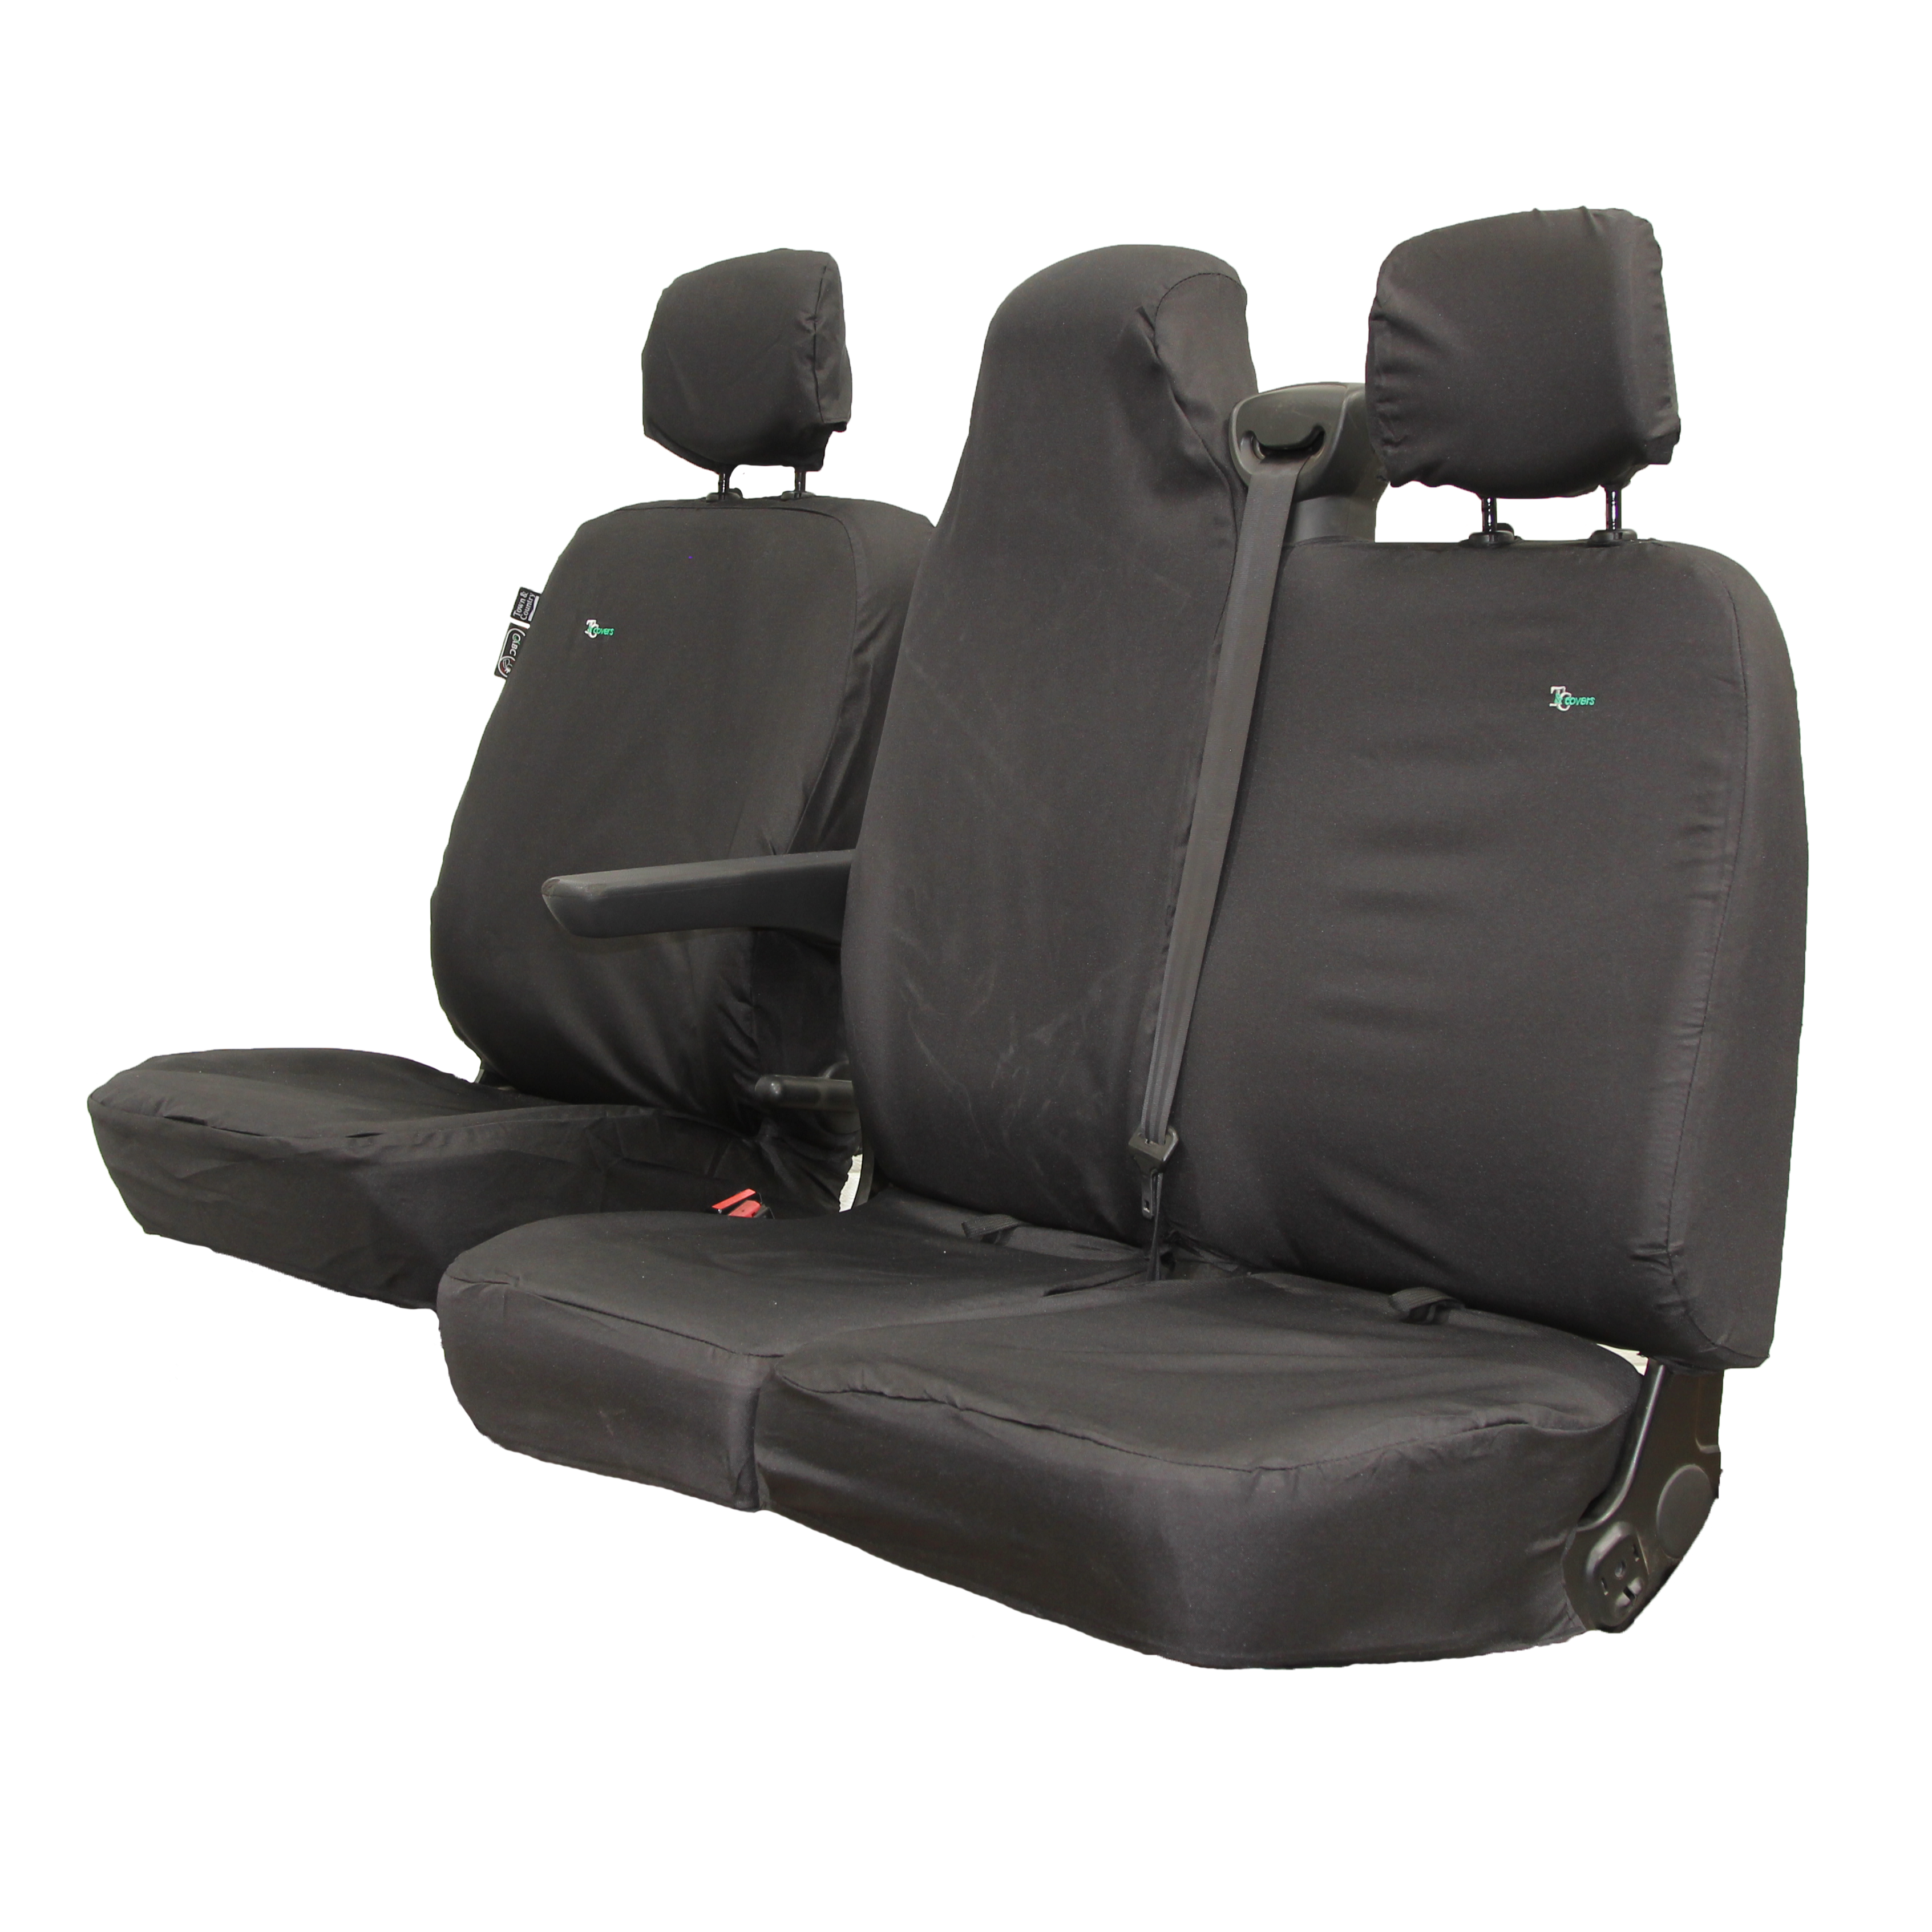 Renault Trafic Seat Covers (2014 onwards)